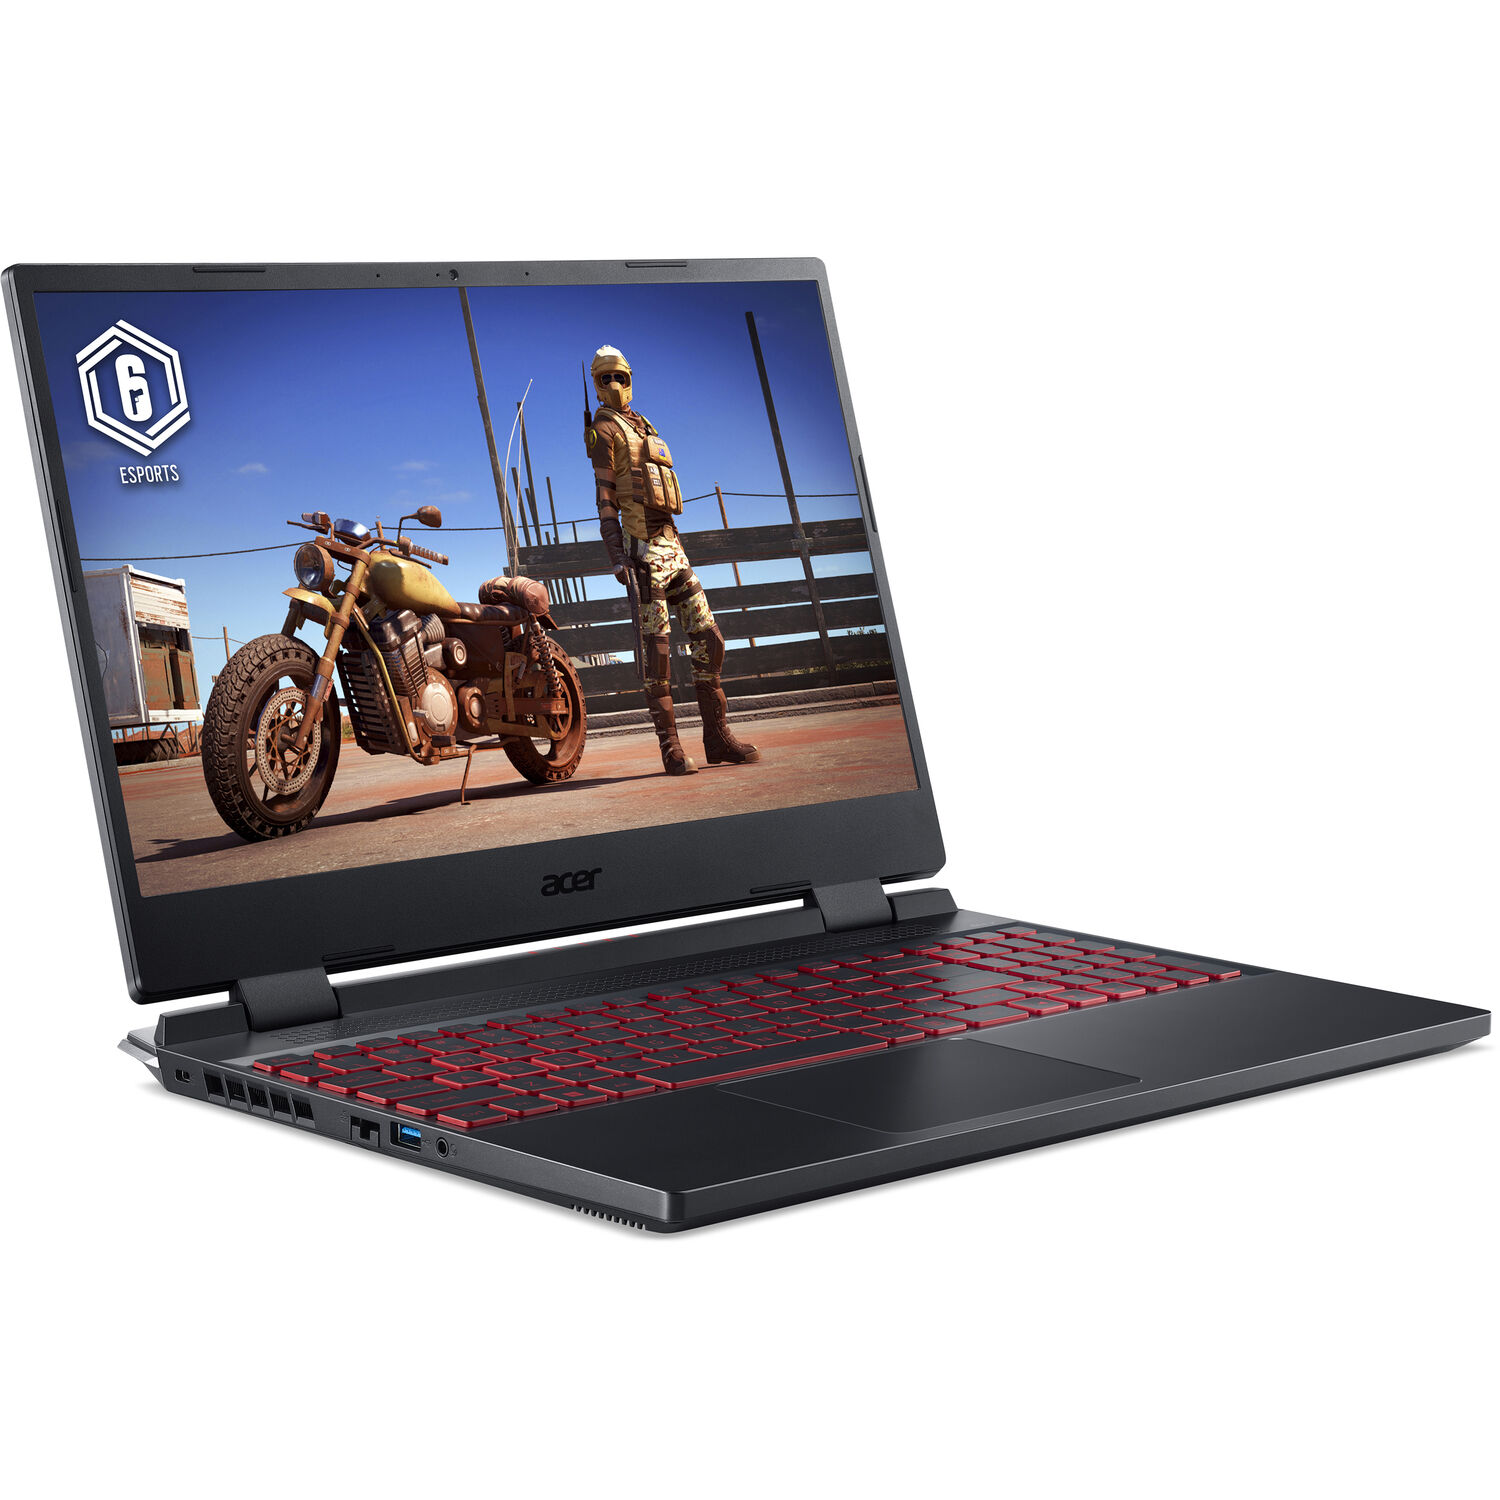 Acer Acer Nitro 5 Gaming/Entertainment Laptop (Intel i5-12500H 12-Core, 17.3in 144Hz Full HD (1920x1080), NVIDIA RTX 3050, 16GB RAM, 1TB PCIe SSD, Backlit KB, Win 11 Home) - image 2 of 7